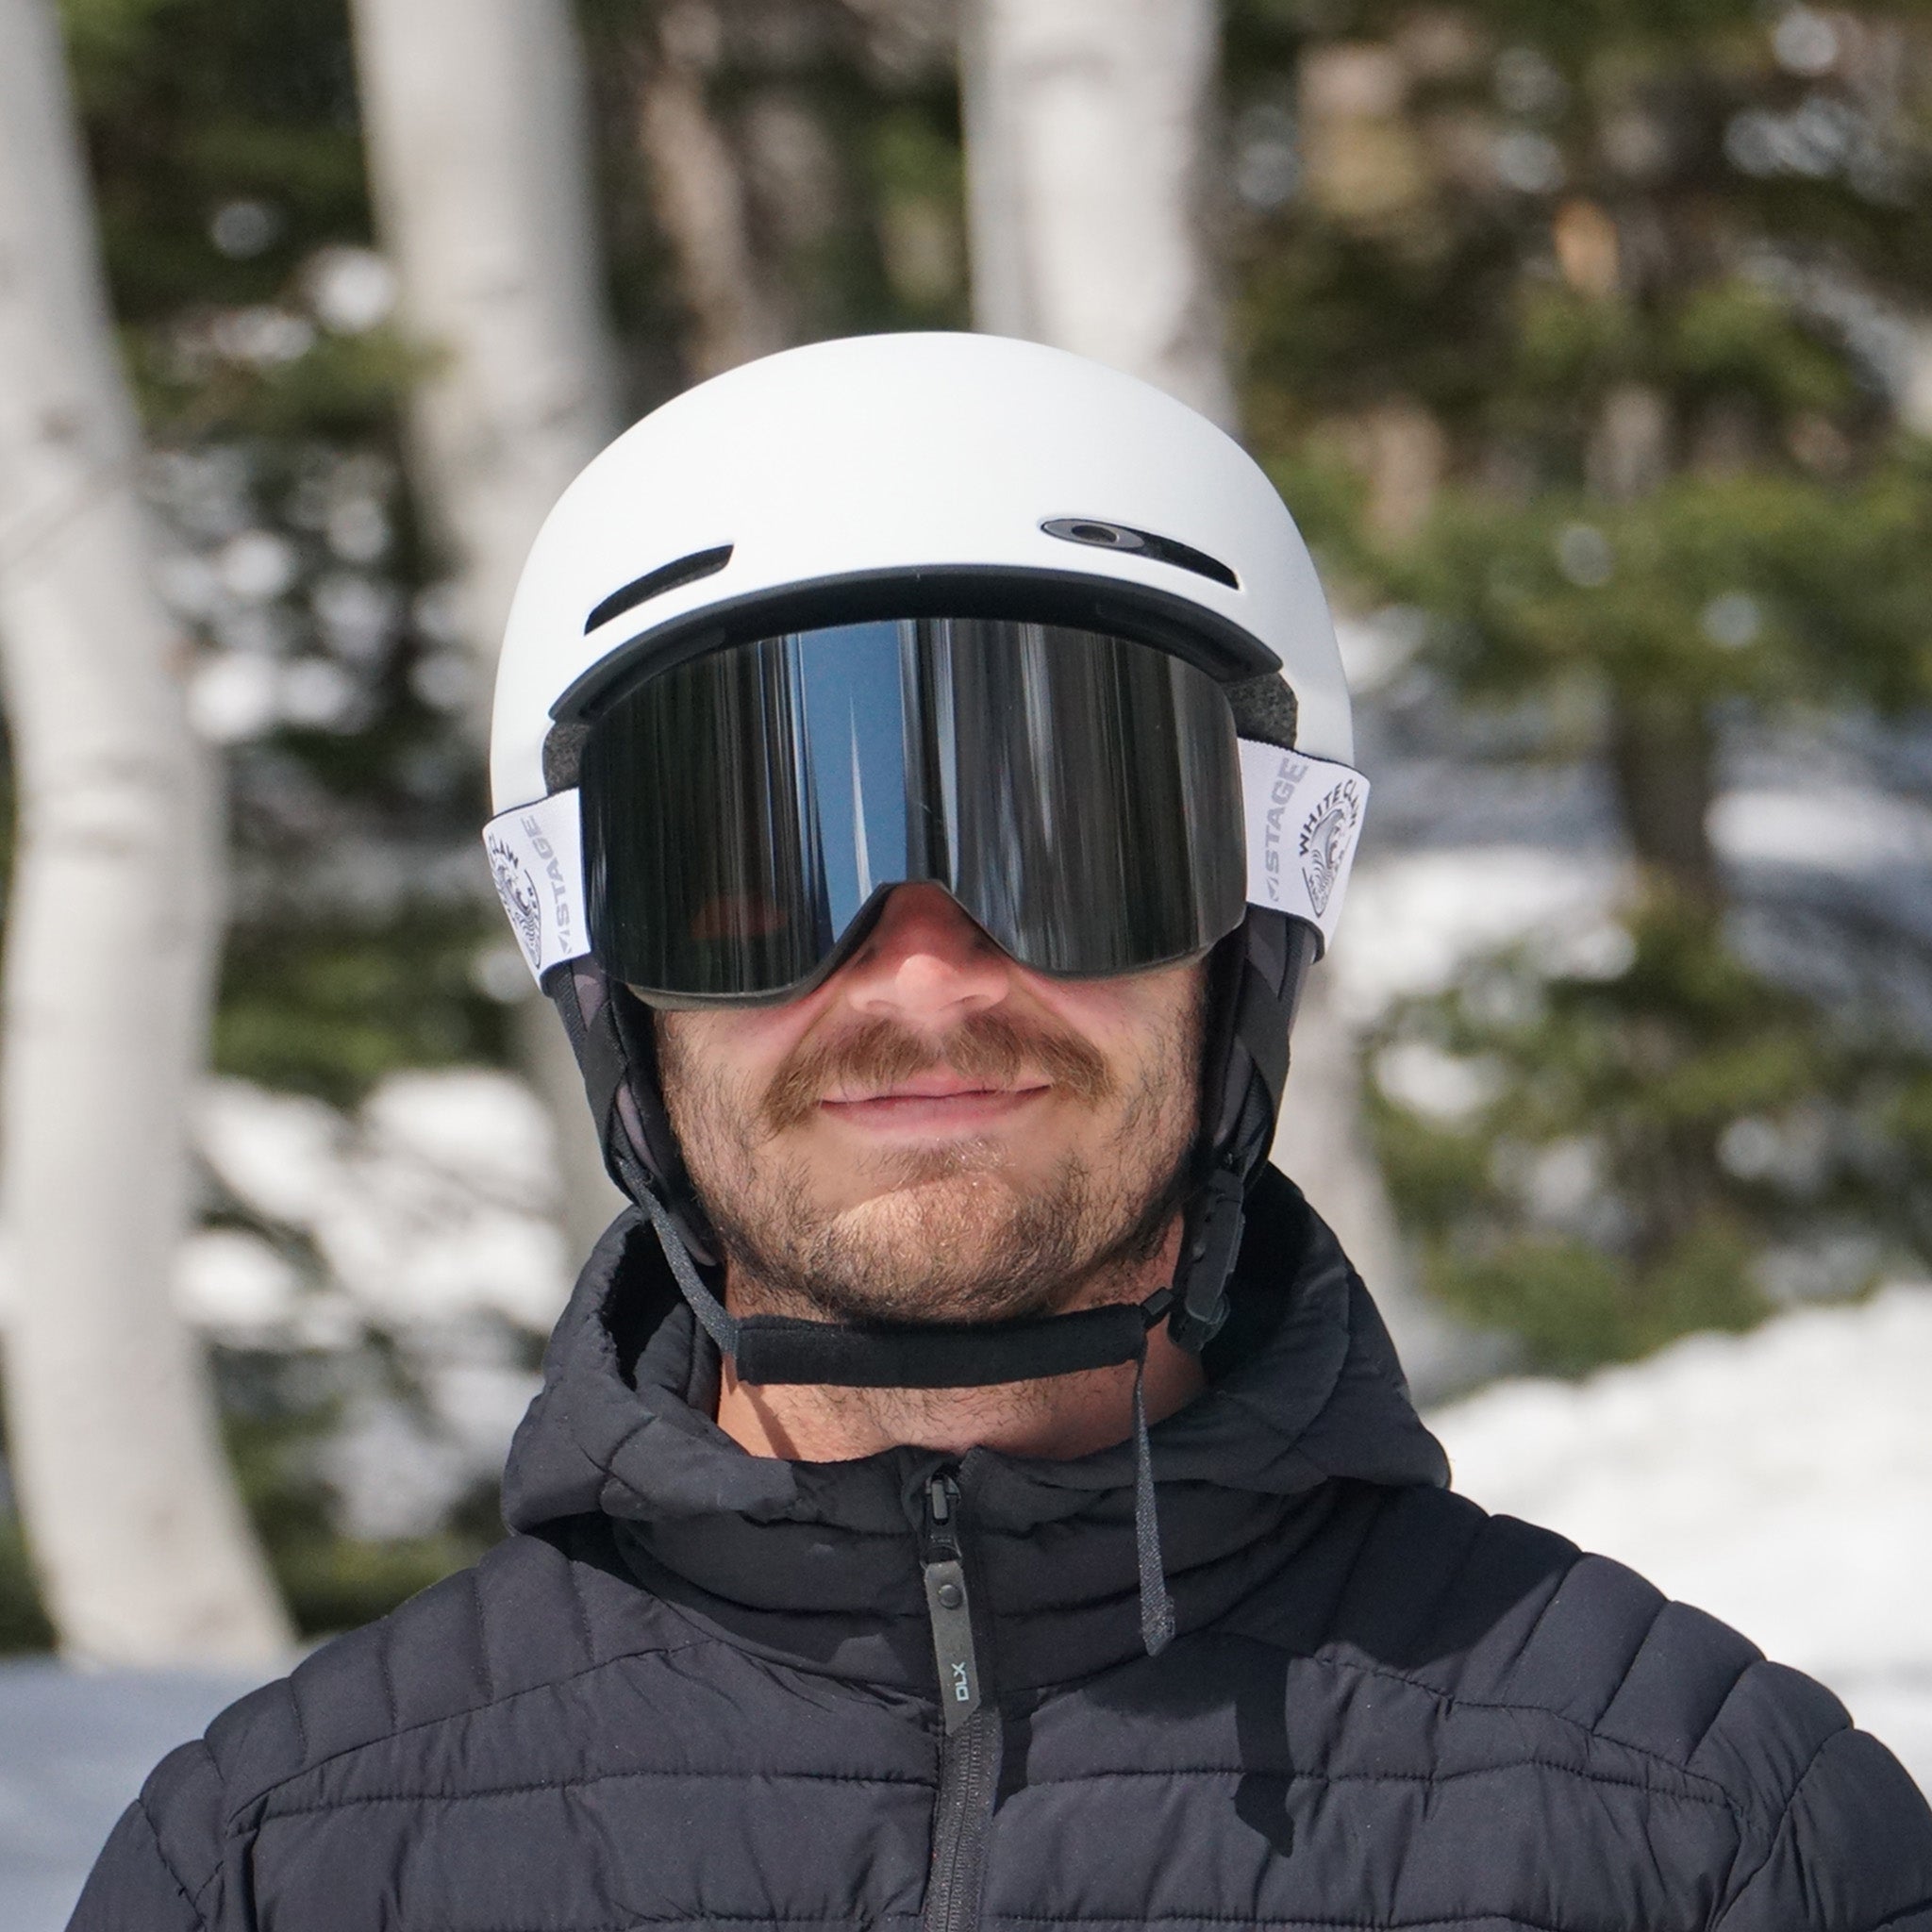 STAGE Propnetic, magnetic ski goggle features two lenses, a Chrome Mirror Smoke lens for Sunny Days, and our best-selling goggle lens: the Detector, for Cloudy / stormy ski days.